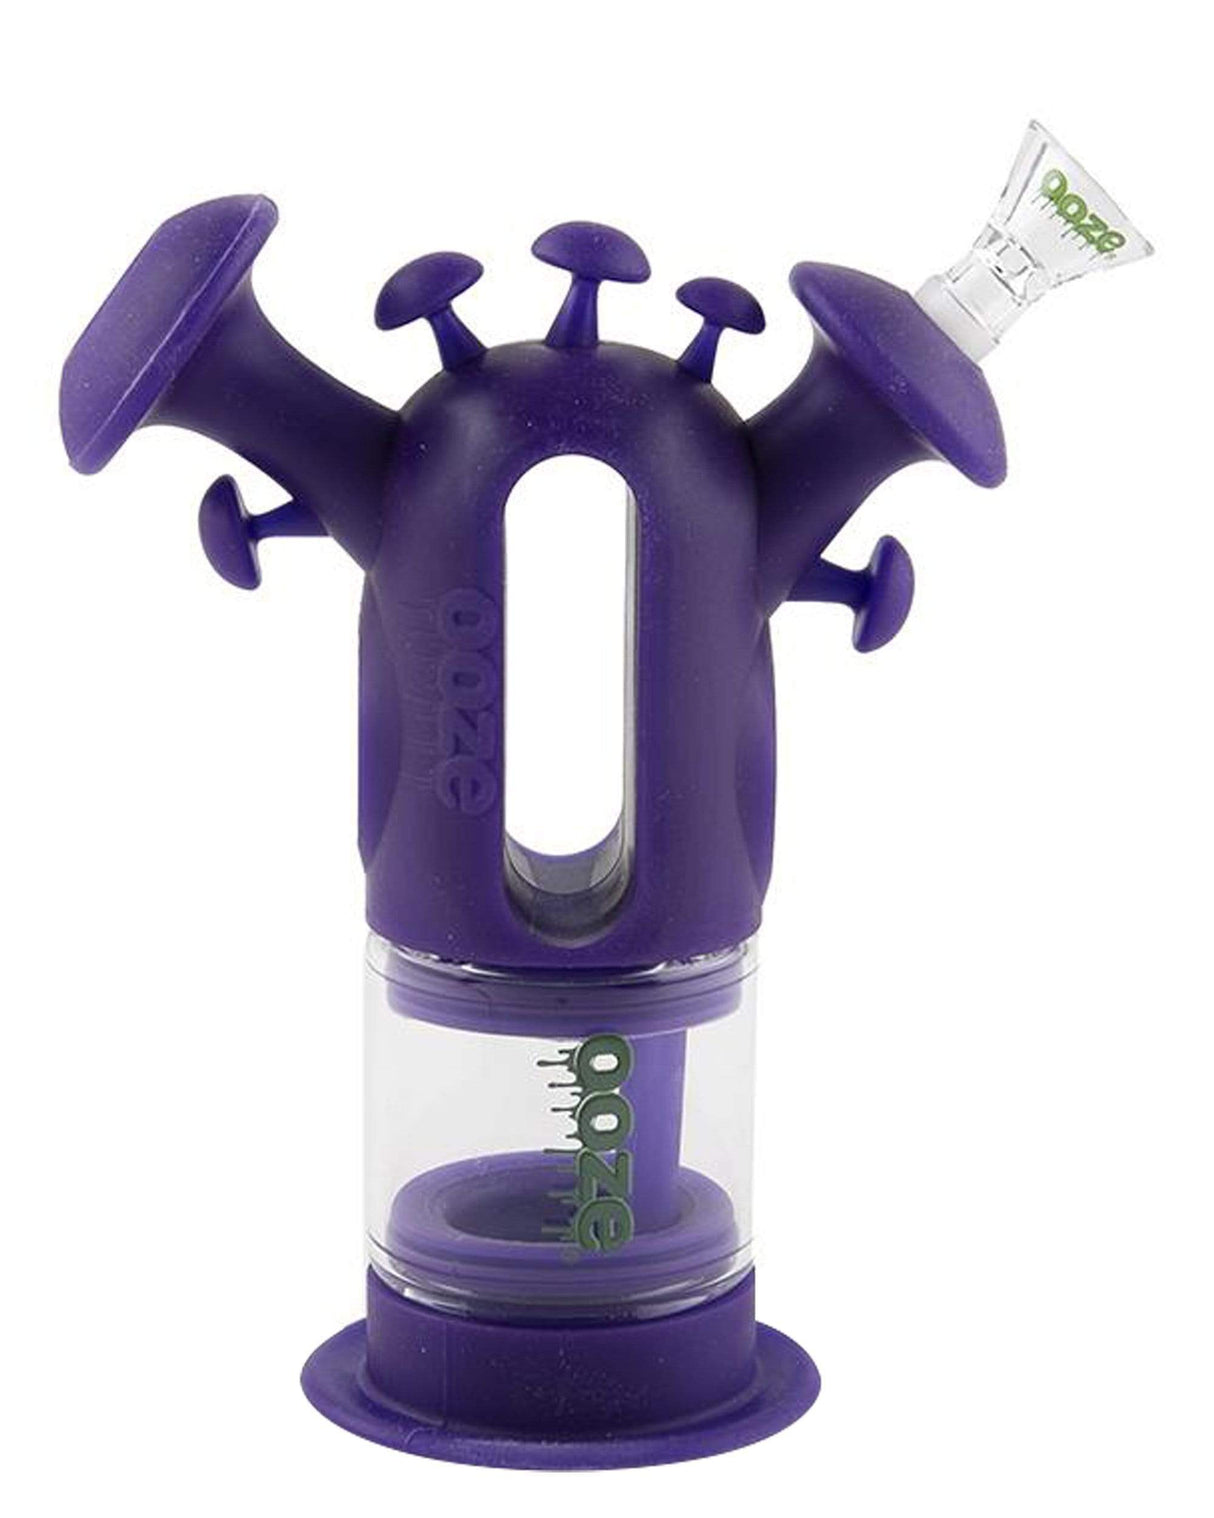 Ooze Trip Silicone Bubbler in Purple, Front View with Quartz Bowl, Ideal for Dry Herbs and Concentrates